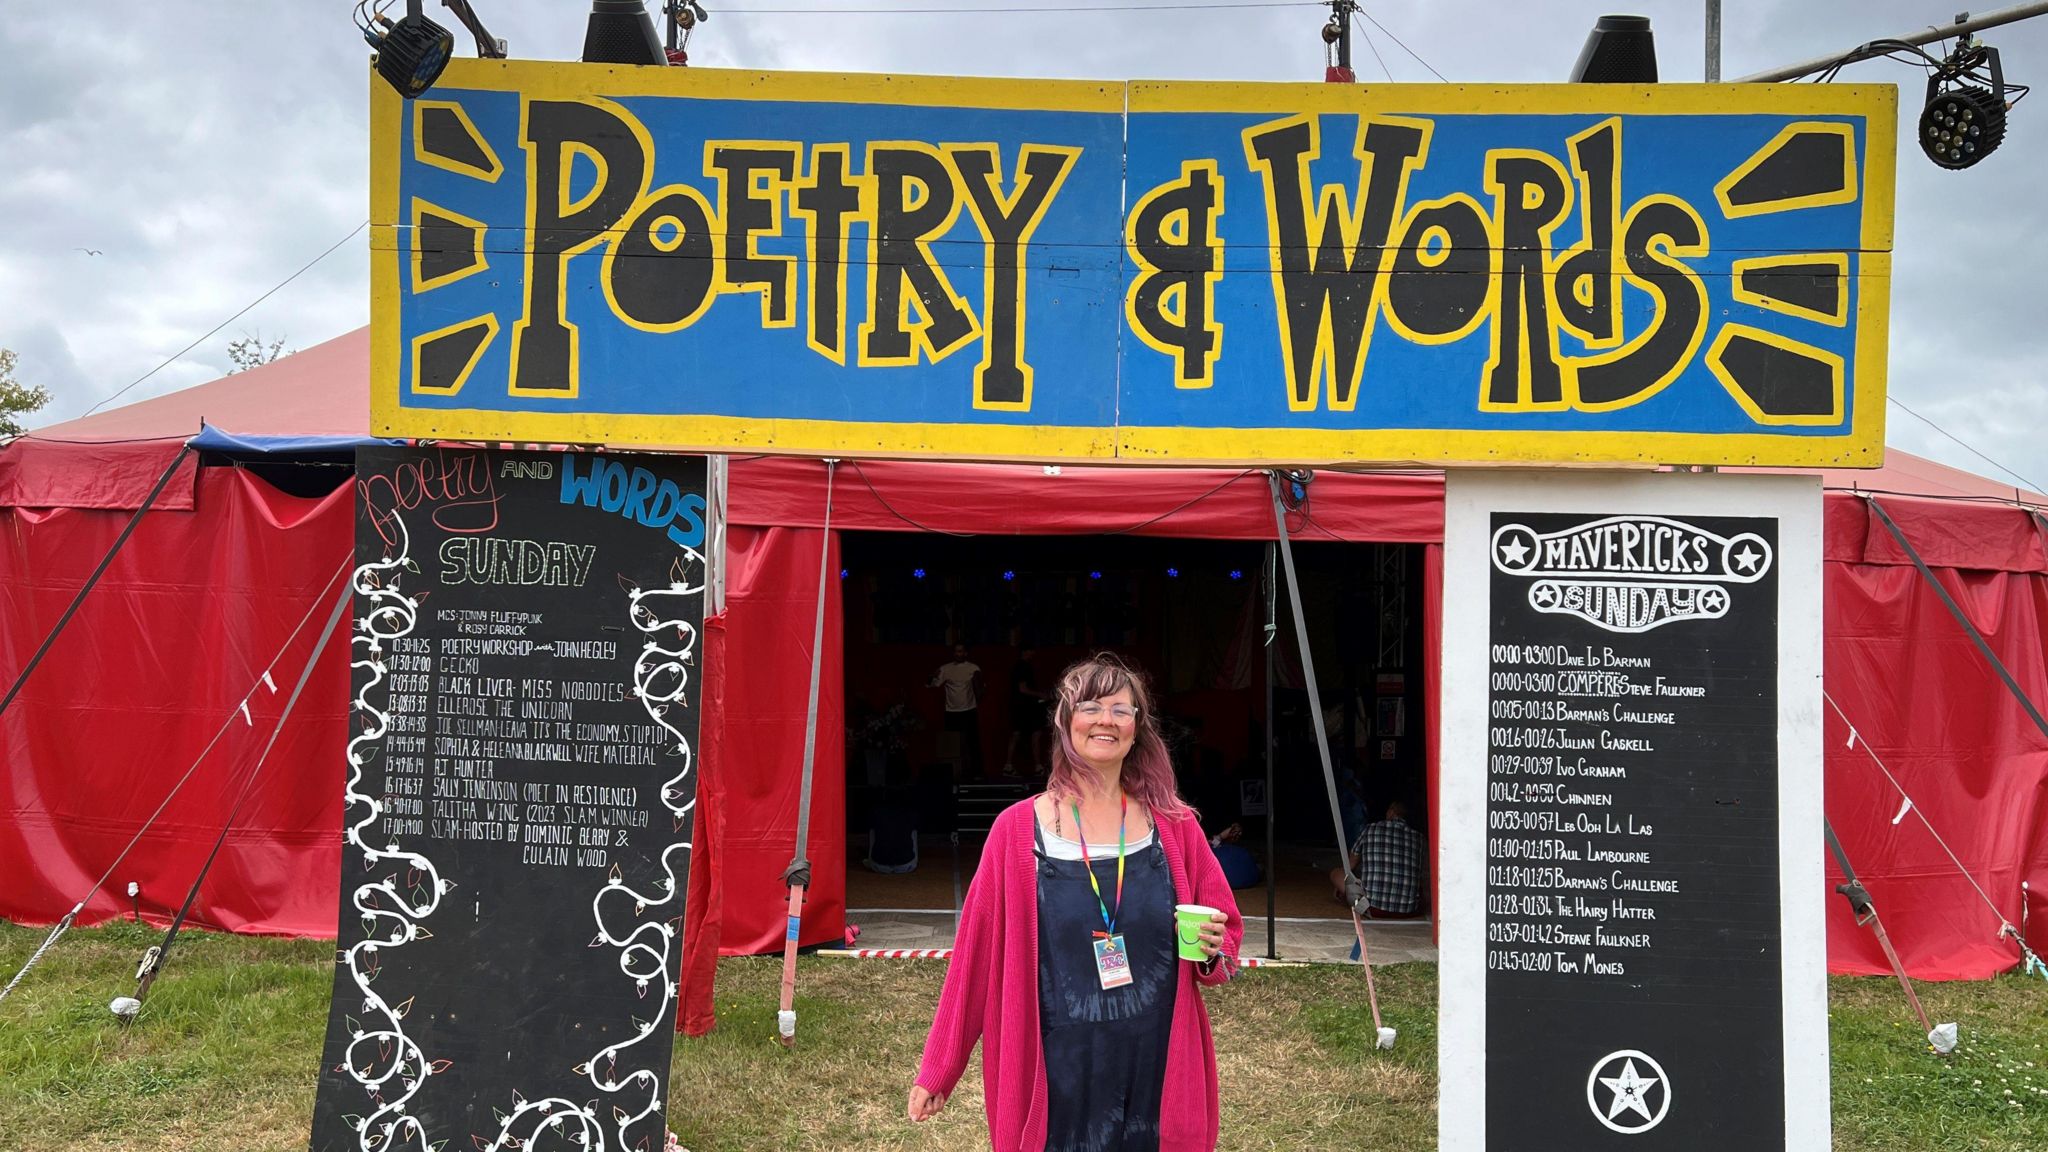 Sally Jenkinson wearing pink top and black outfit, stood in front of huge blue and yellow sign saying 'Poetry & Words'.